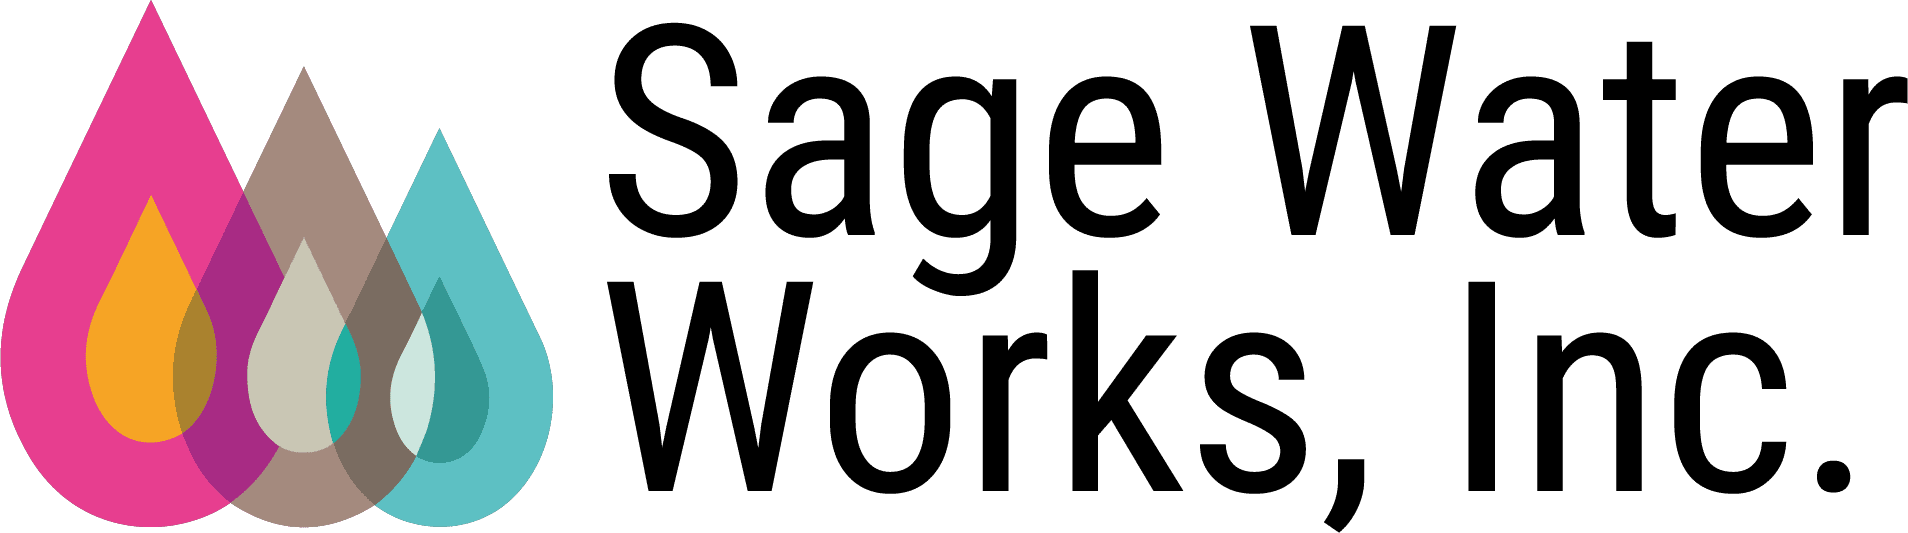 Sage Water Works, Inc. logo with text